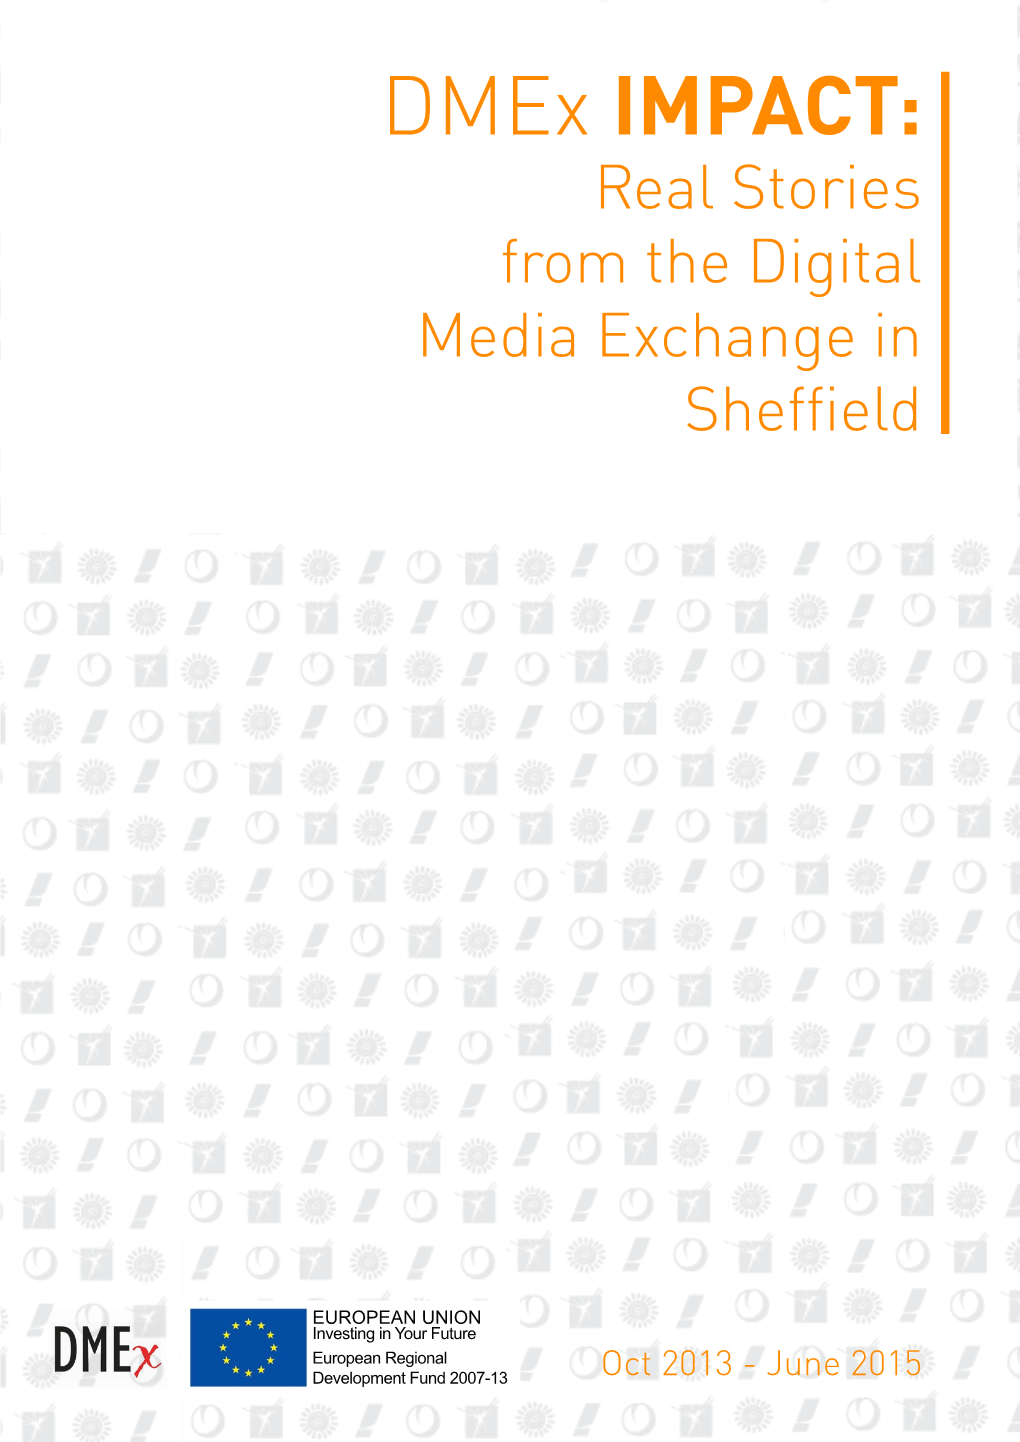 Dmex IMPACT: Real Stories from the Digital Media Exchange in Sheffield